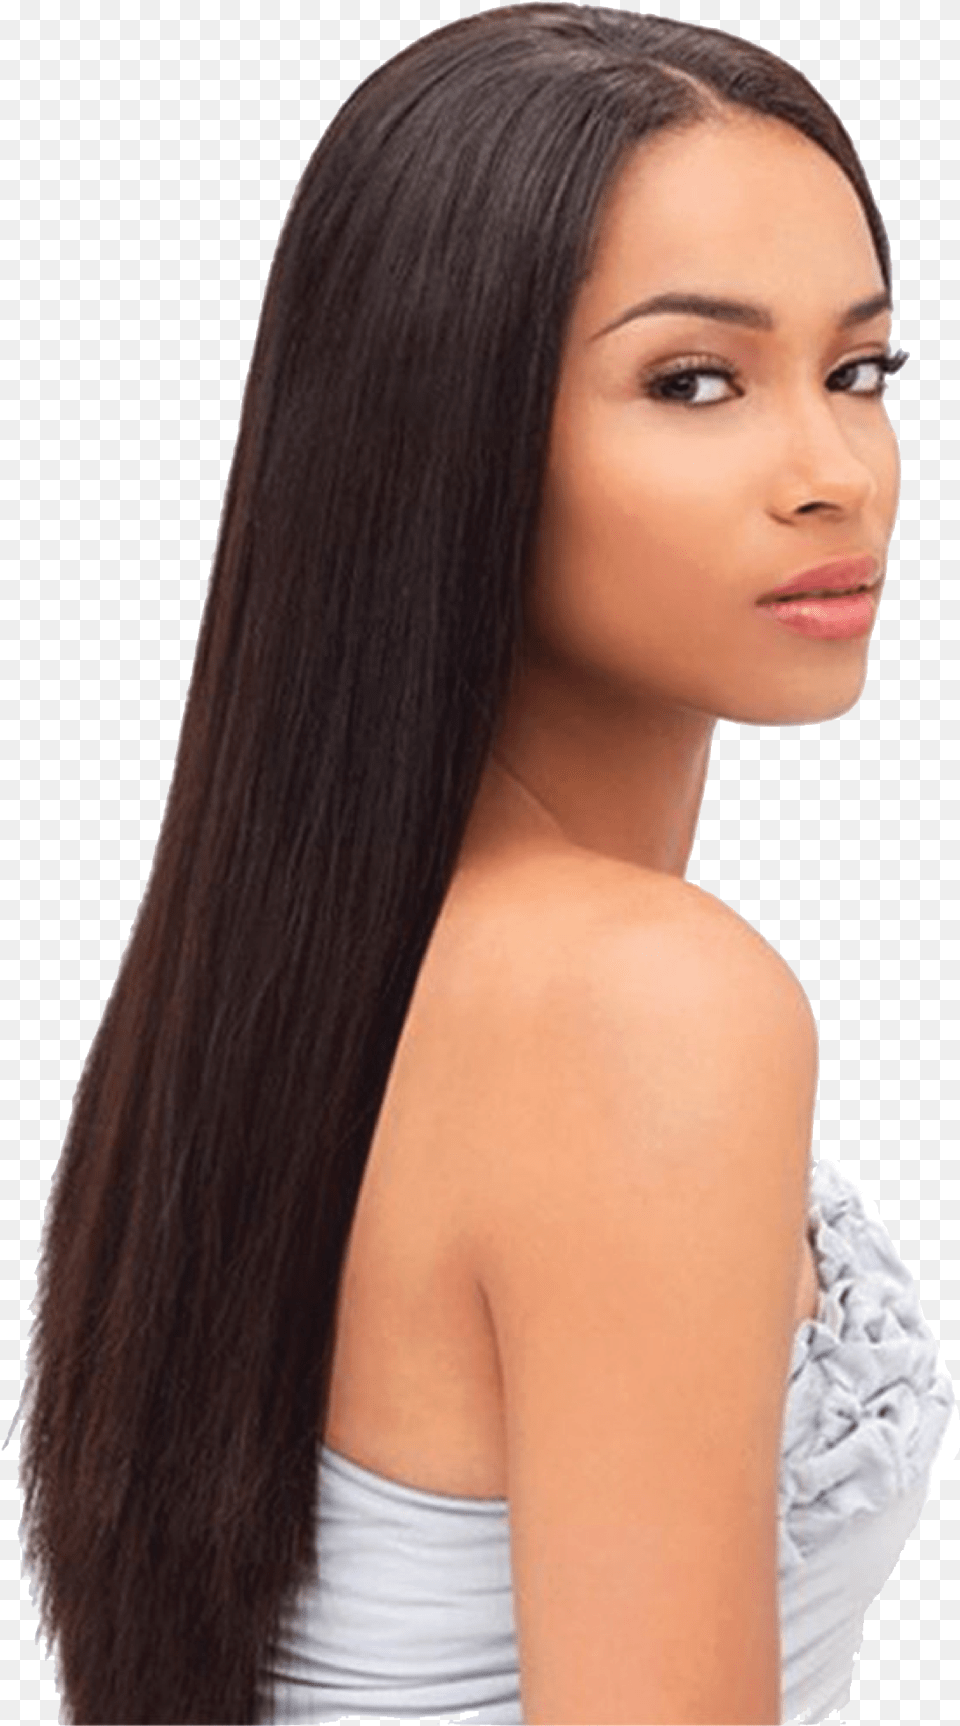 Hairs File Mixed Girls Straight Hair, Adult, Female, Person, Woman Png Image